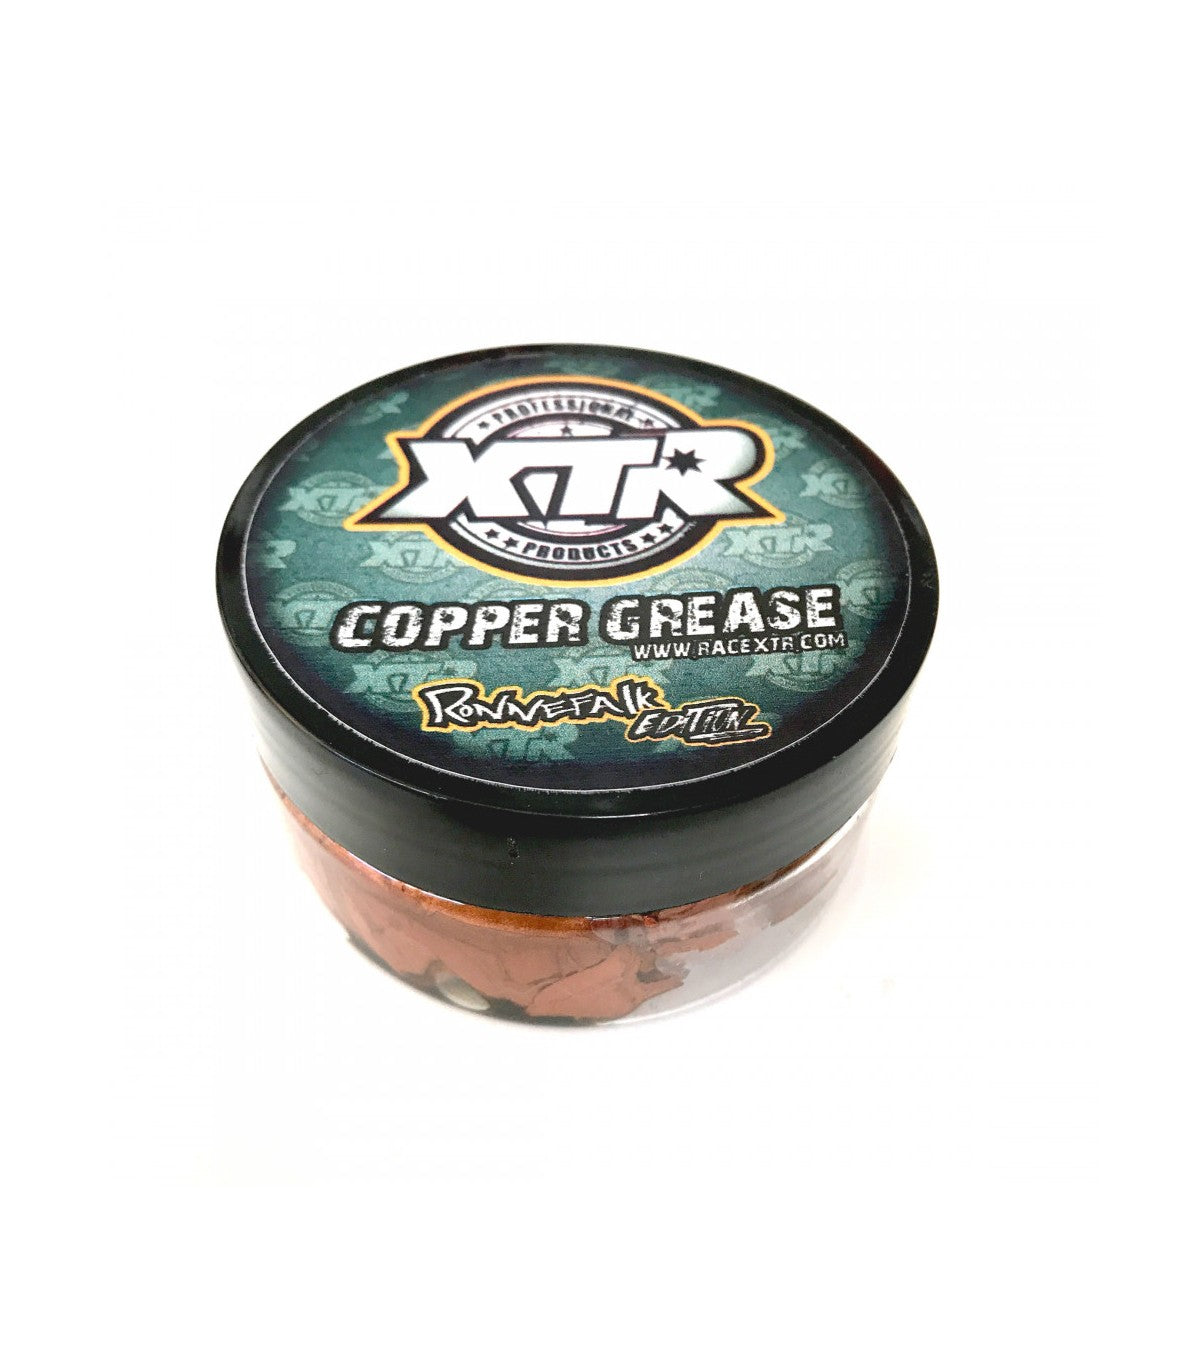 COPPER GREASE 75 RONNEFALK EDTION GEARS